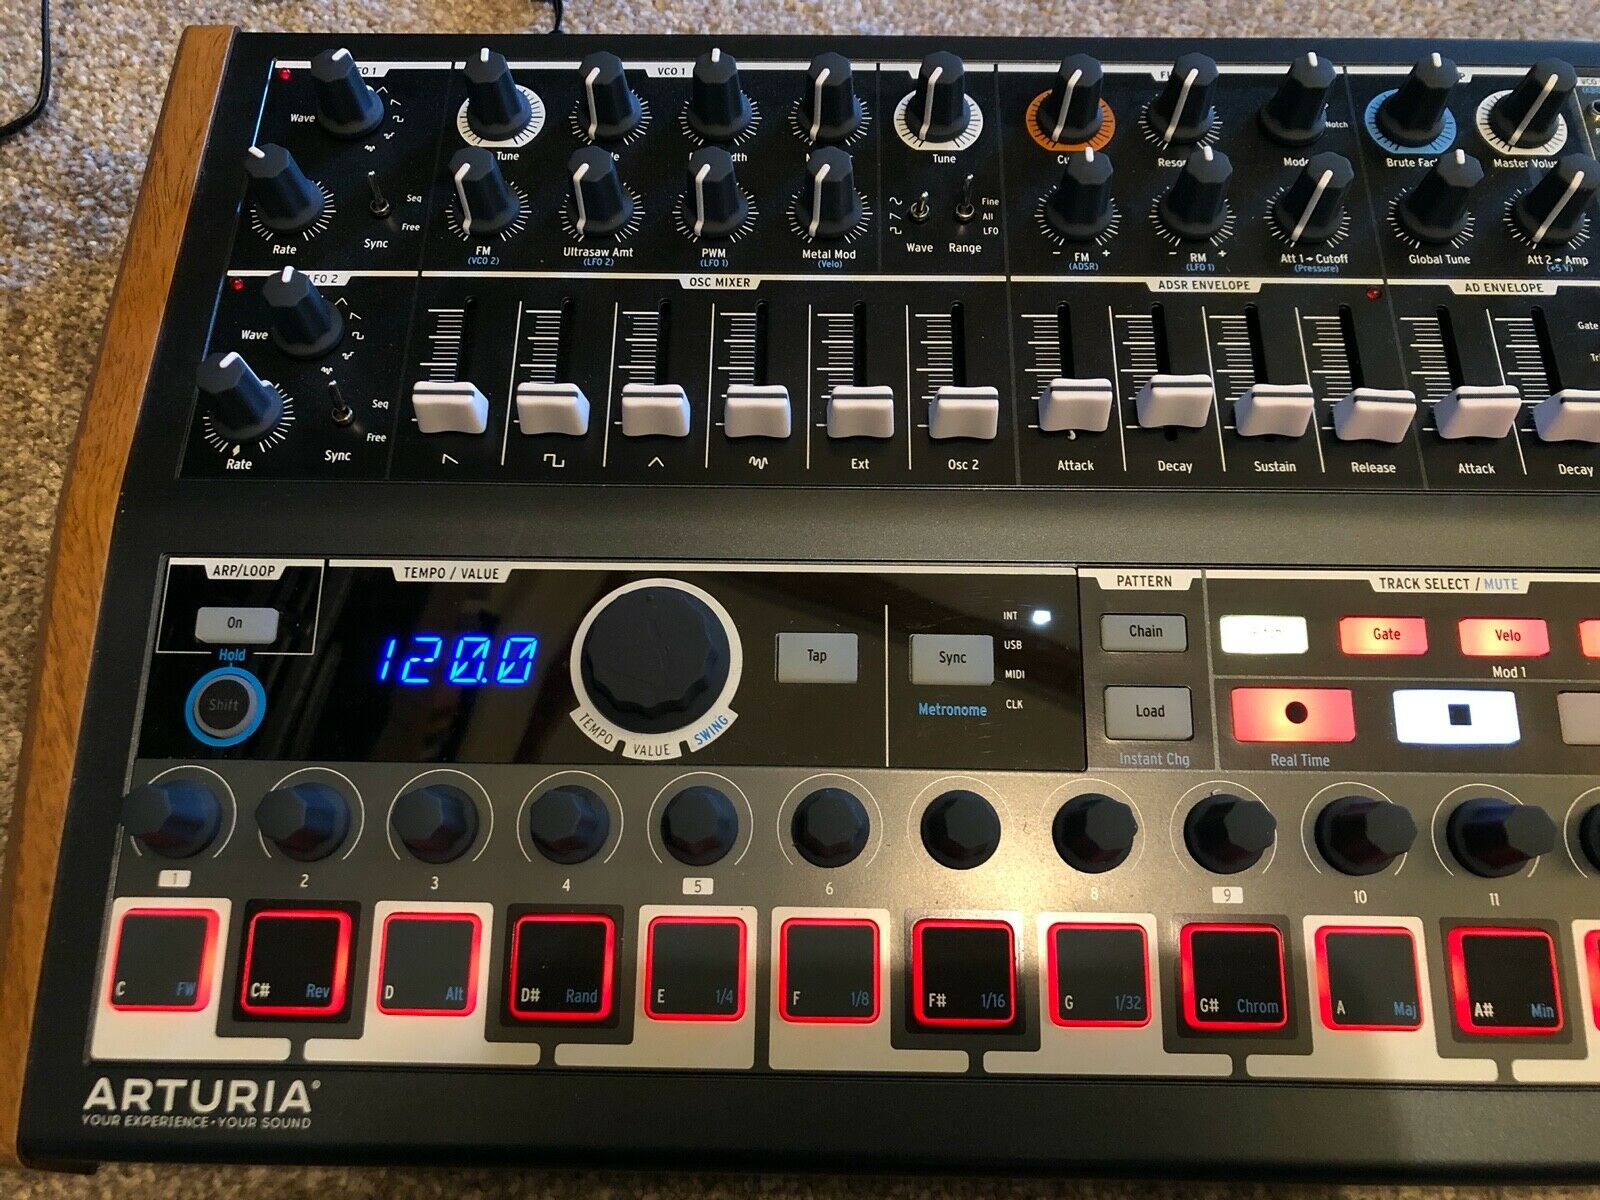 MATRIXSYNTH: Arturia Minibrute 2S analogue semi-modular synth and sequencer